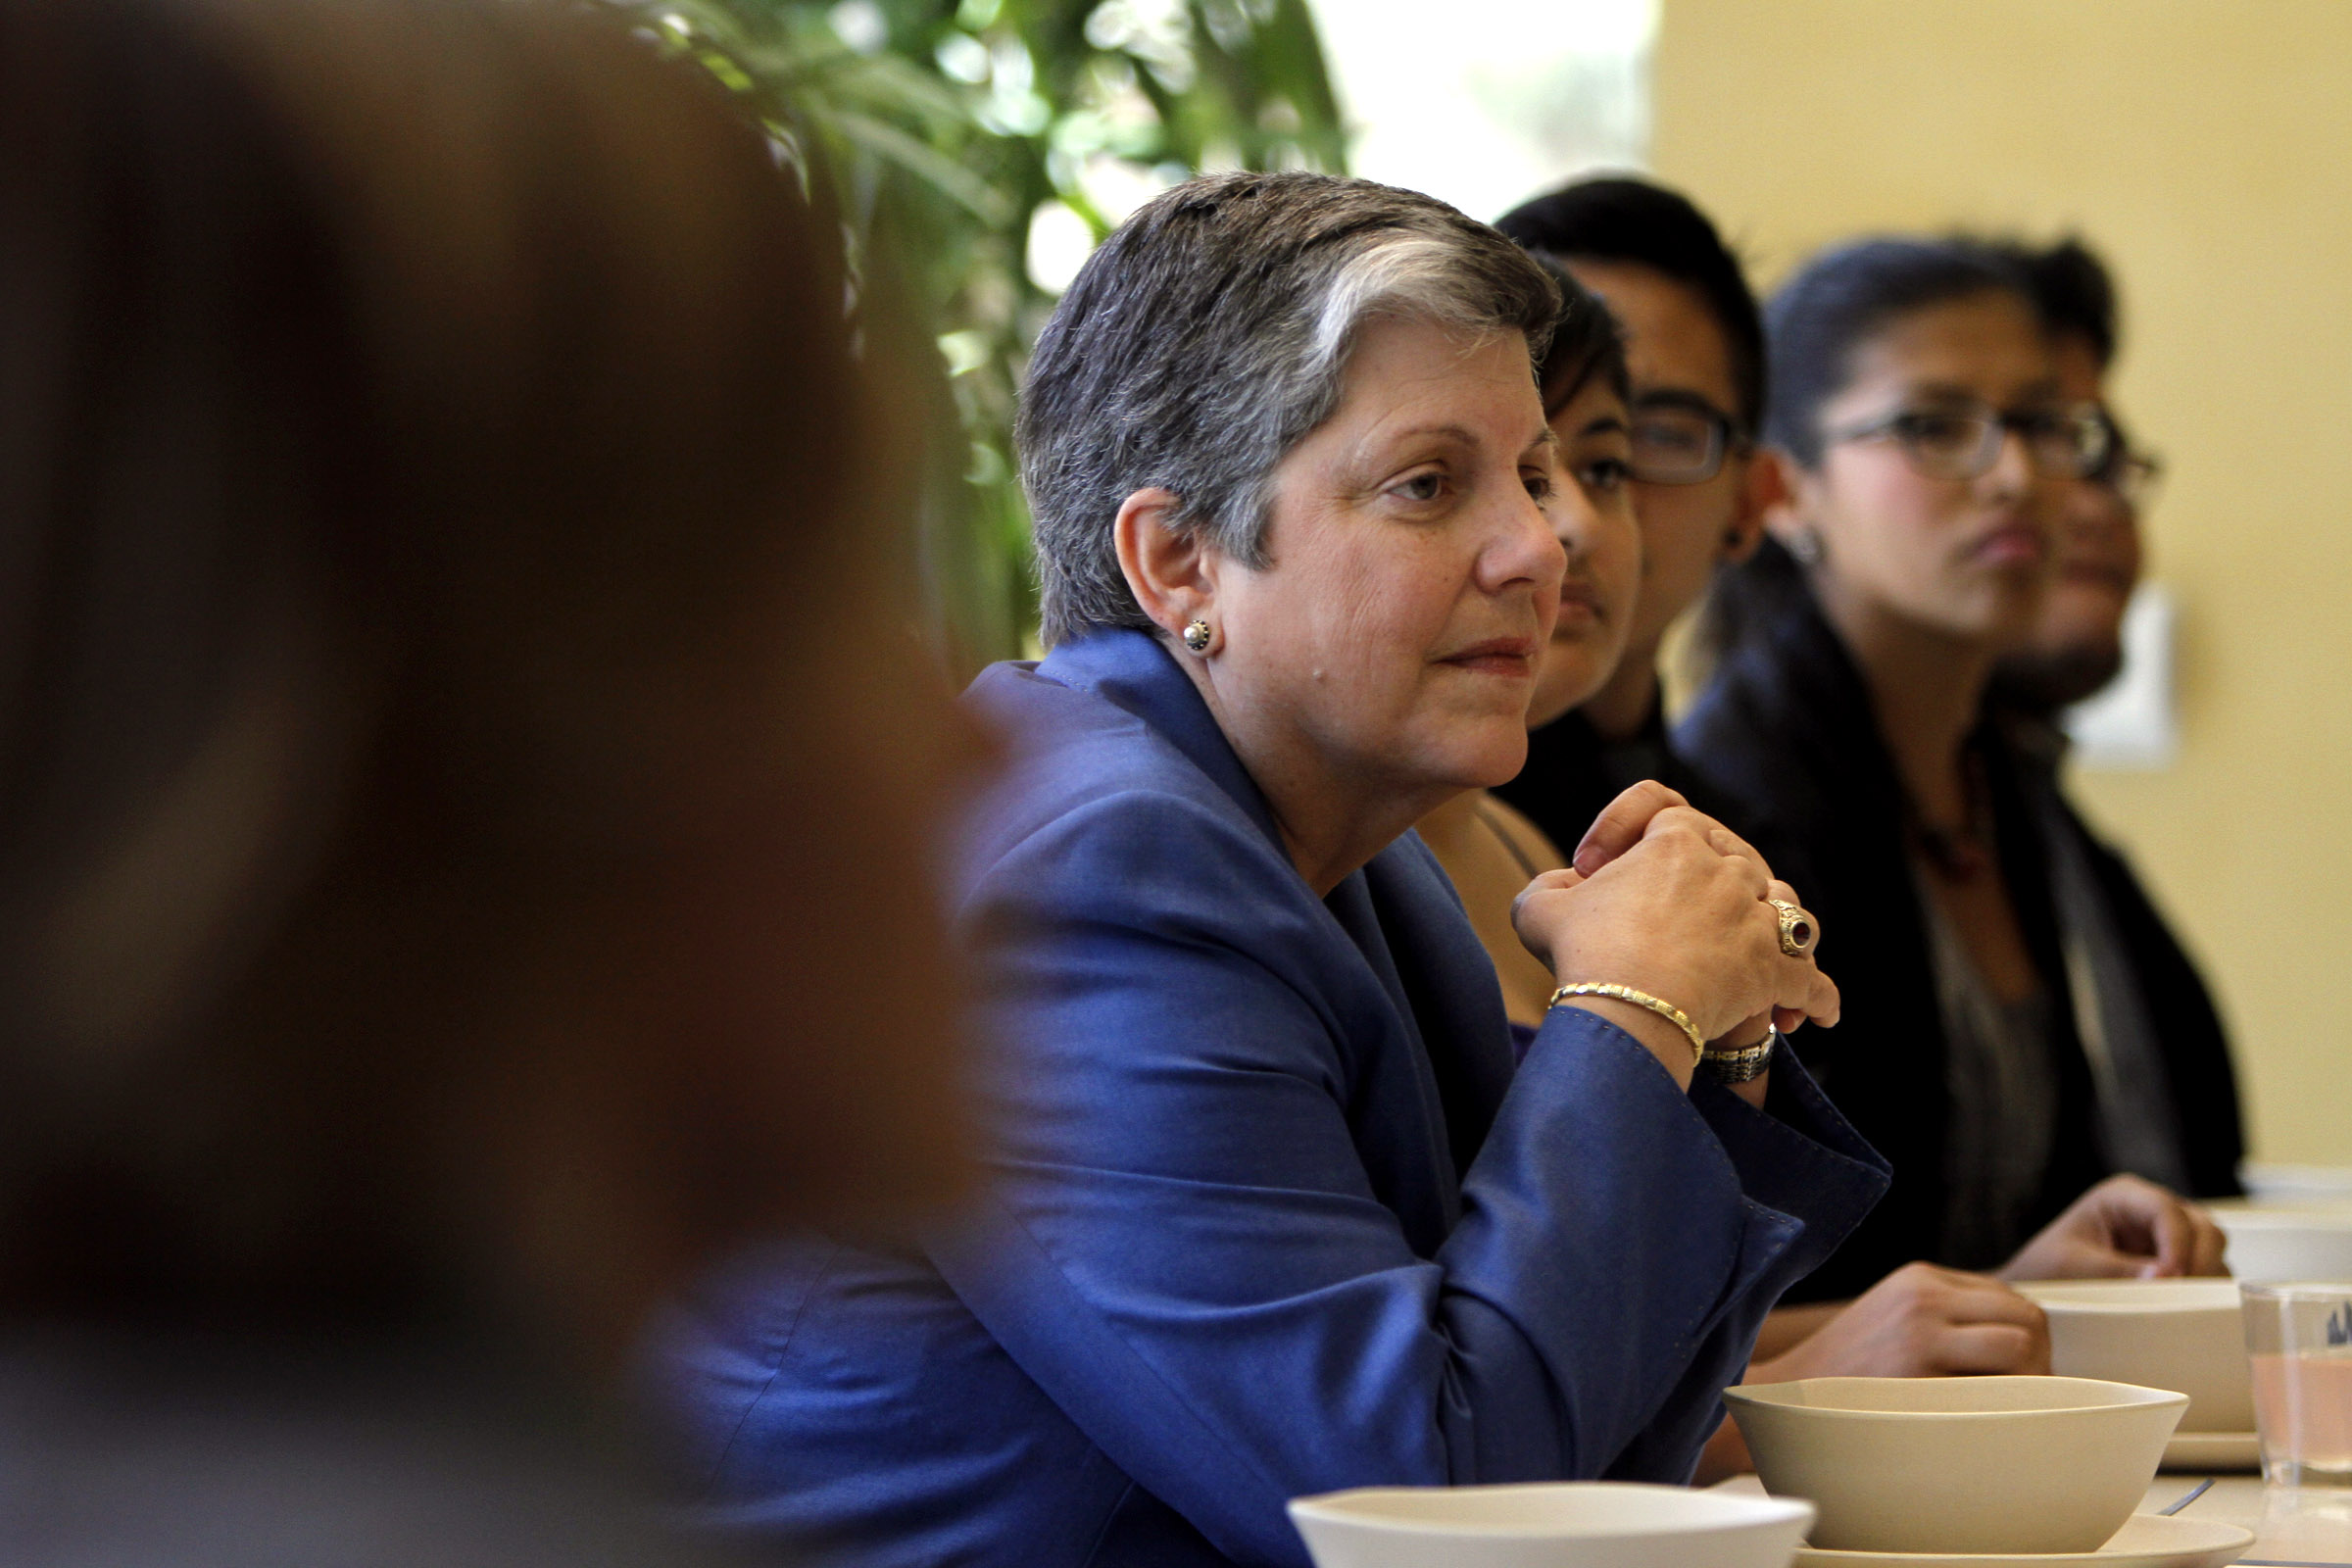 University of California President Janet Napolitano has lunch with students at UCLA on October 11, 2013 in Westwood, California. (Pool&mdash;Getty Images)